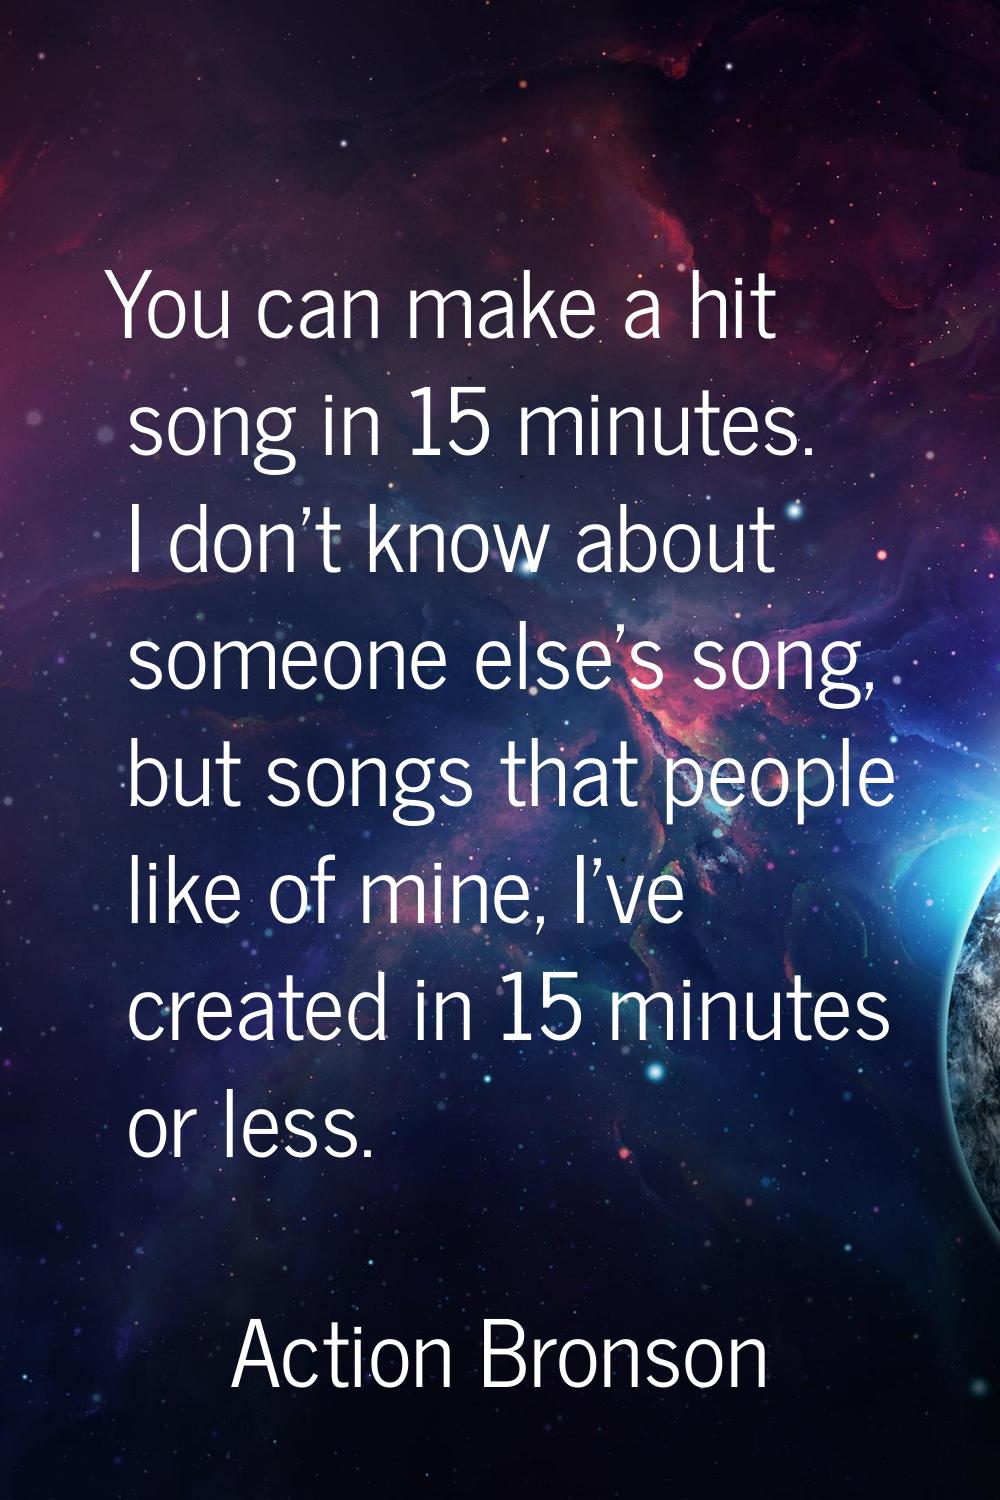 You can make a hit song in 15 minutes. I don't know about someone else's song, but songs that peopl